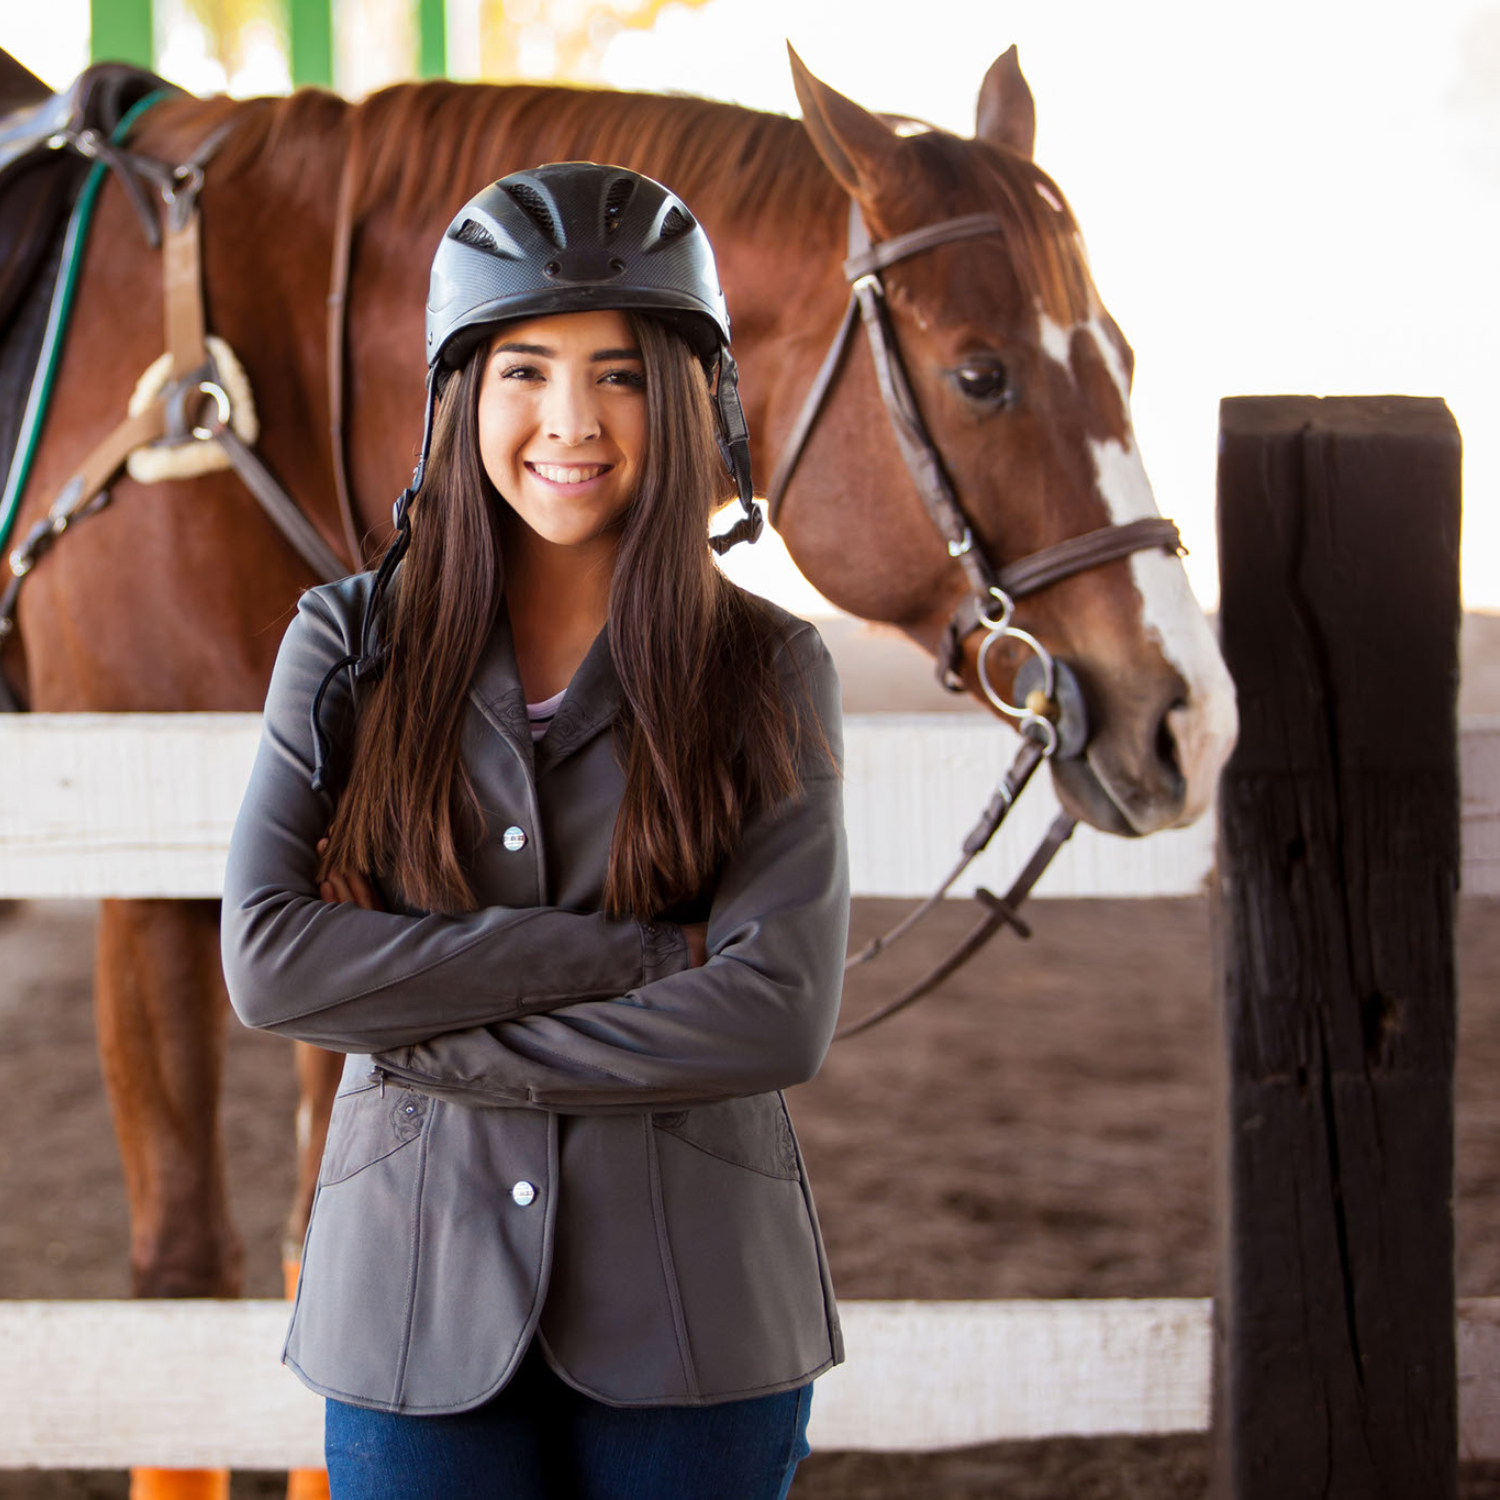 A young woman smiles in front of a beginner horse.